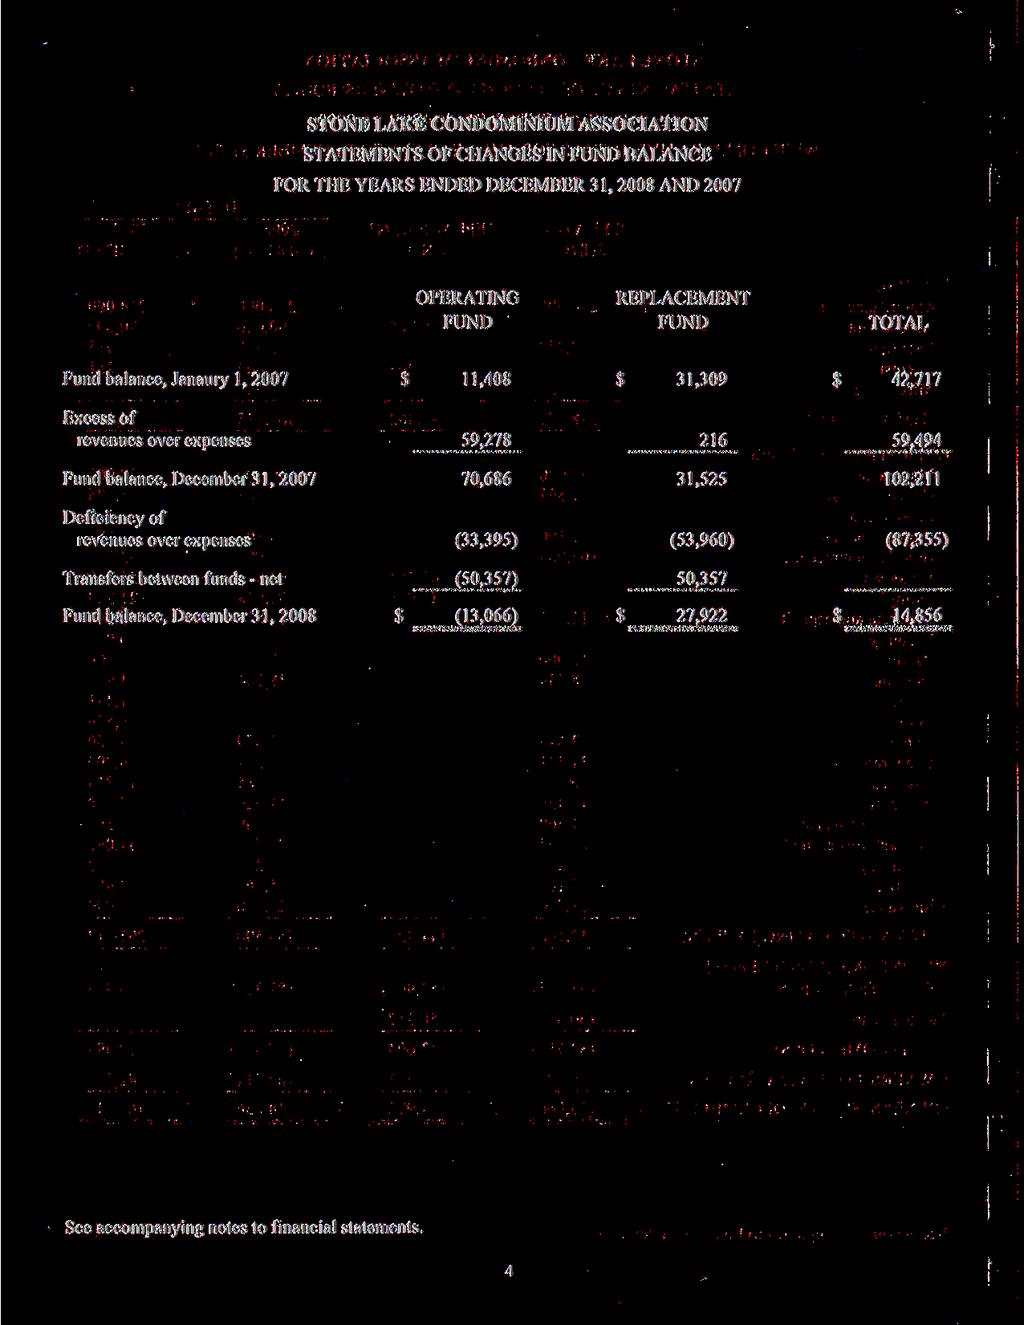 STATEMENTS OF CHANGES IN FUND BALANCE FOR THE YEARS ENDED DECEMBER 31, 2008 AND 2007 OPERATING REPLACEMENT FUND FUND TOTAL Fund balance, Janaury 1,2007 $ 11,408 $ 31,309 $ 42,717 Excess of revenues